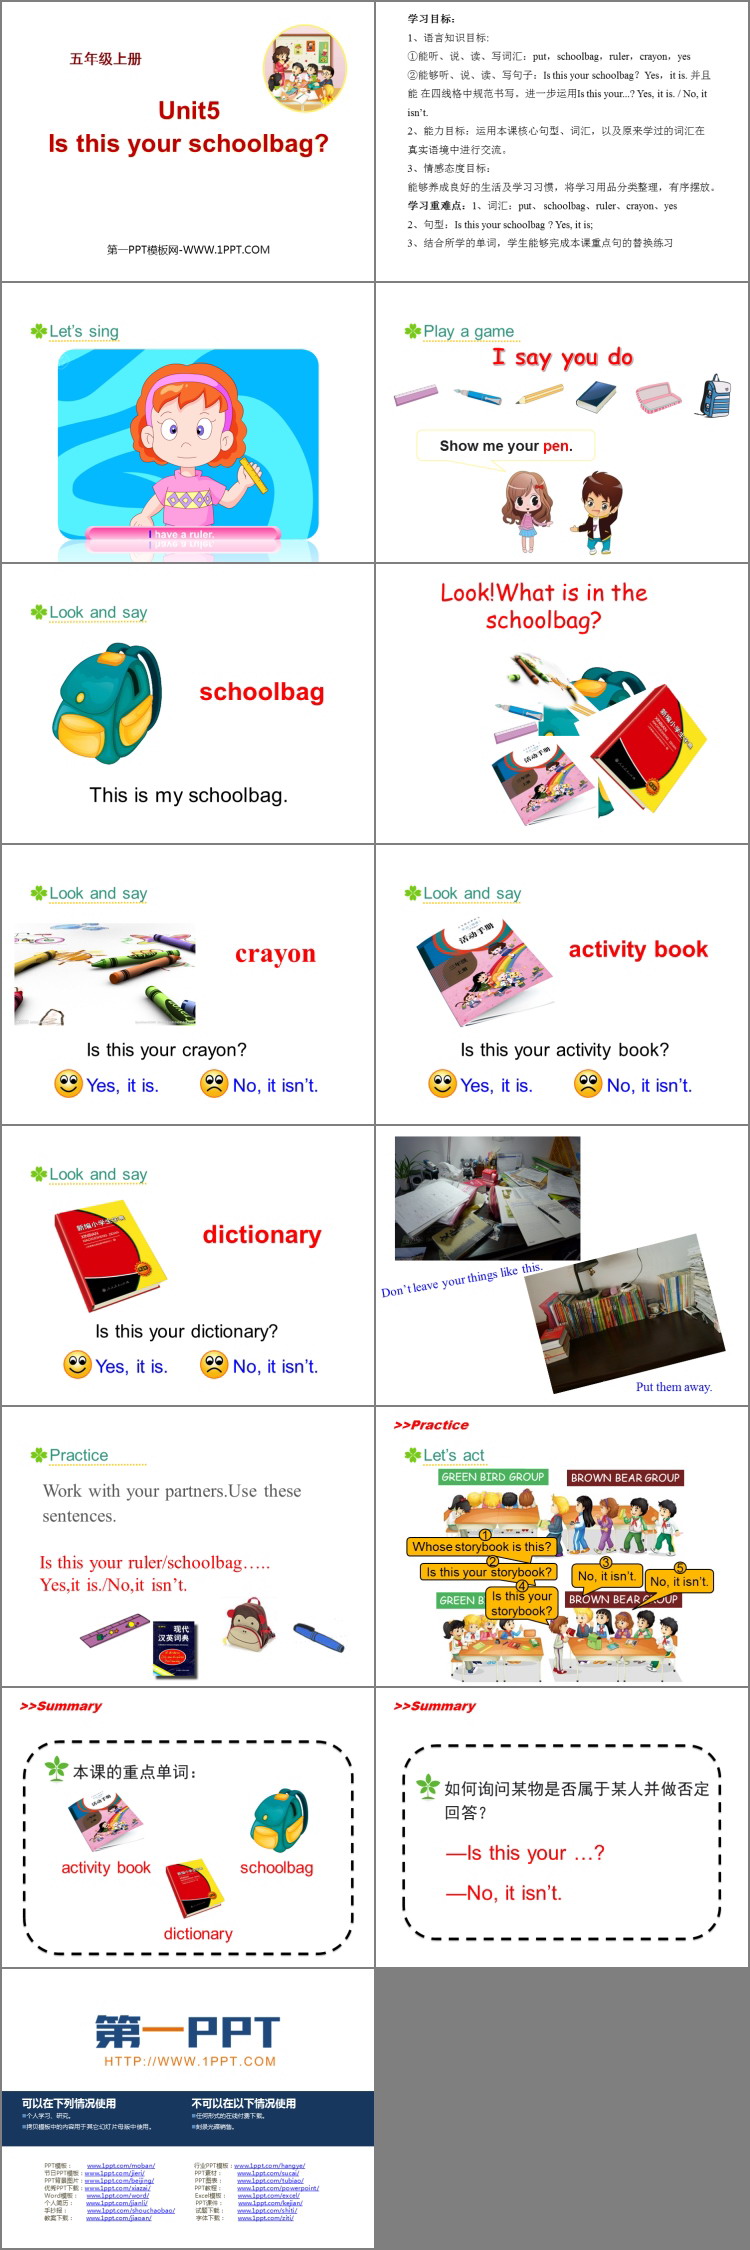 《Is this your schoolbag?》PPT教学课件-预览图02